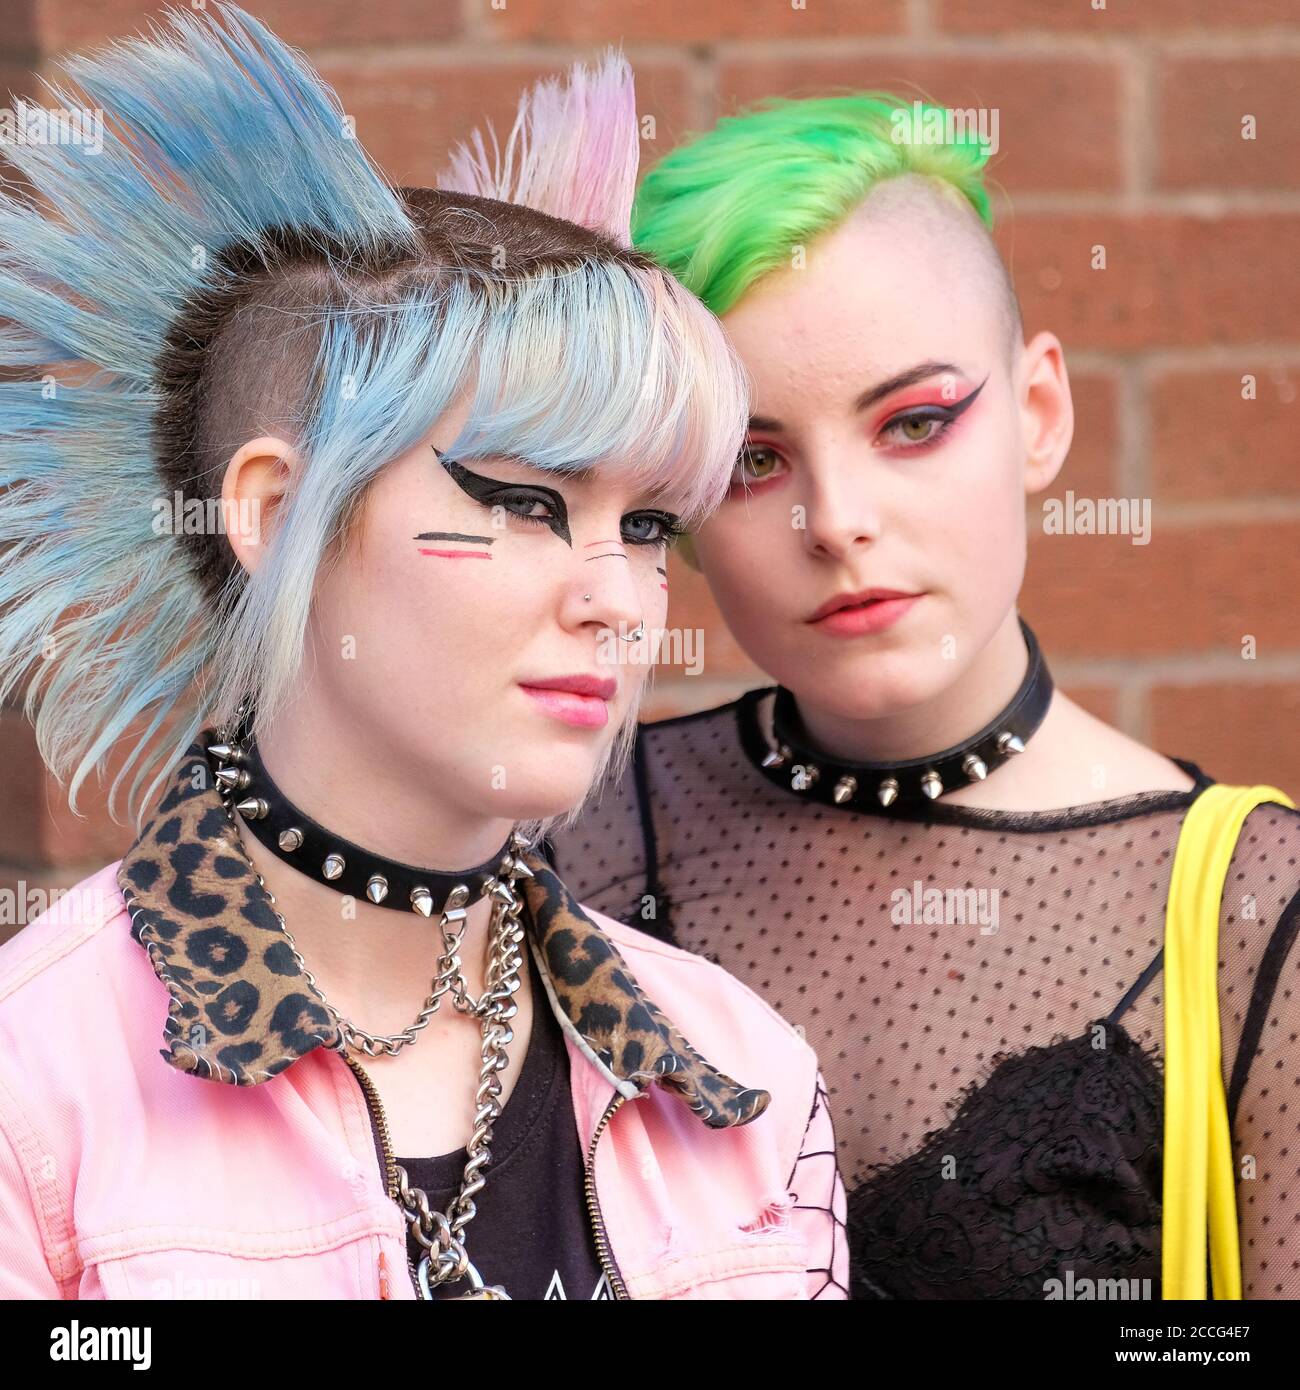 2 beautiful punk girls with studded collars, vivid hair styles and dramatic  makeup Stock Photo - Alamy